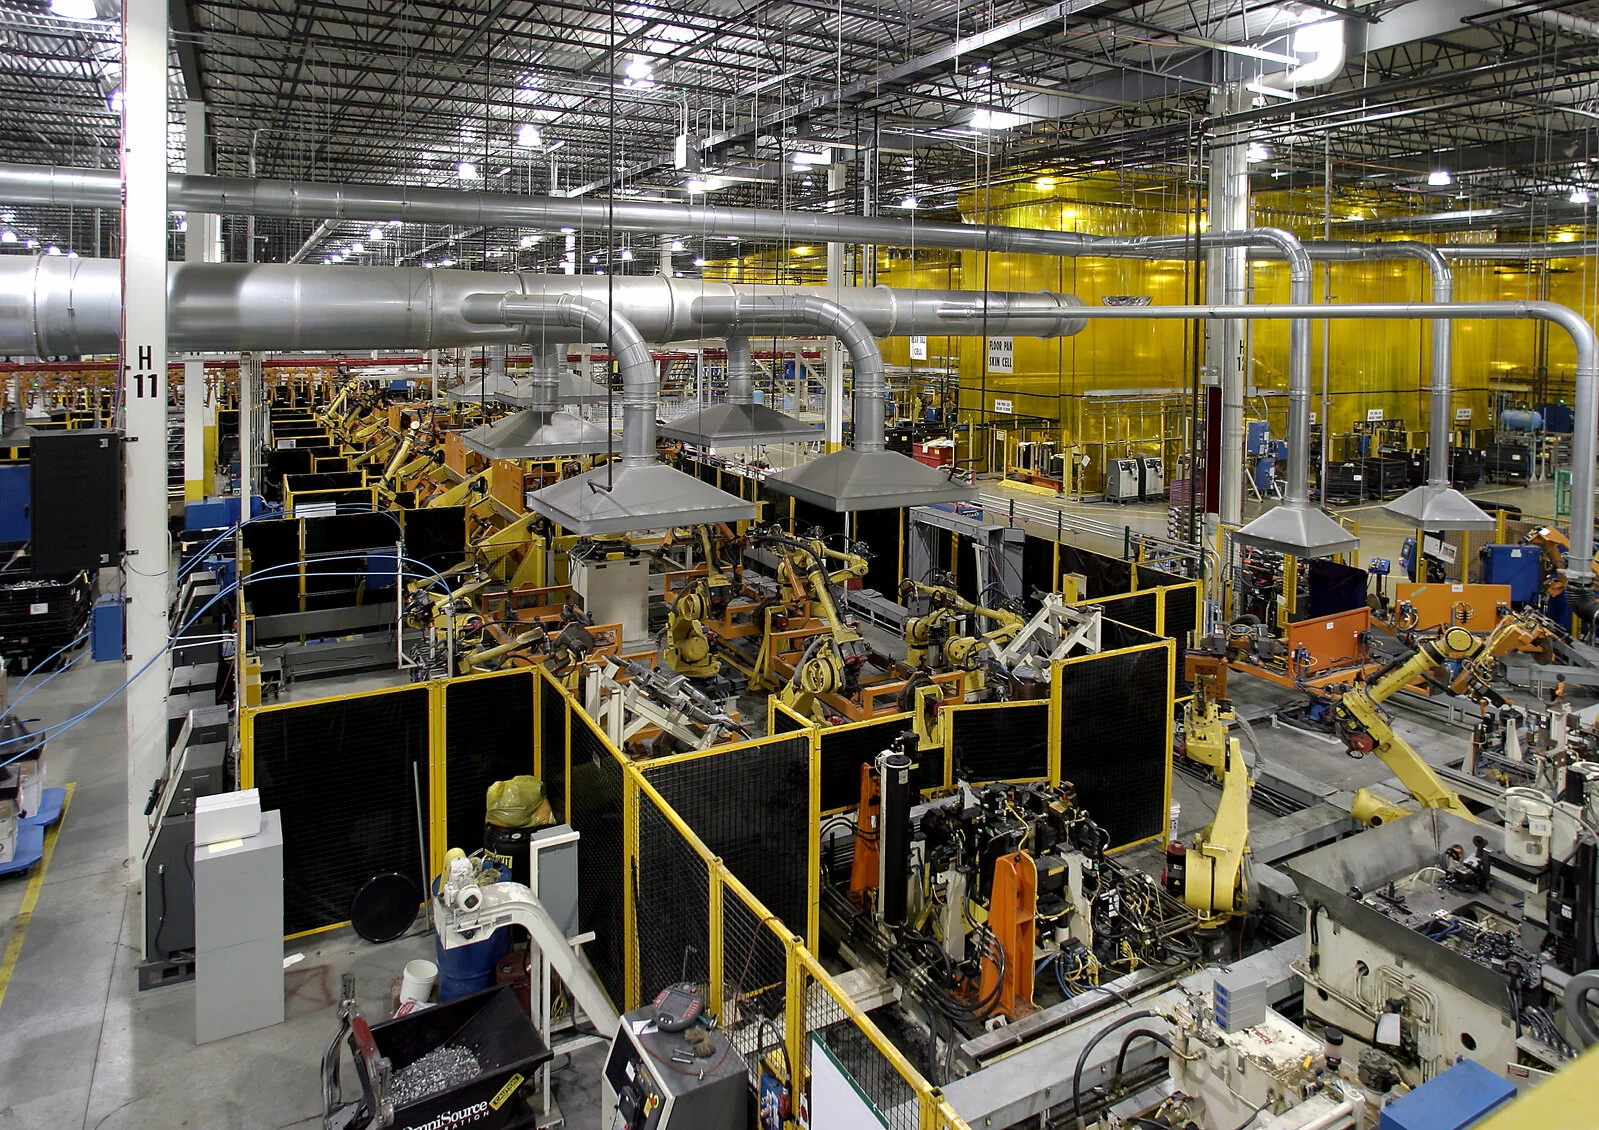 Interior manufacturing facility, robotic assembly line, overhead vents, extremely vast building, yellow floor to ceiling walls in background for specific manufacturing process.